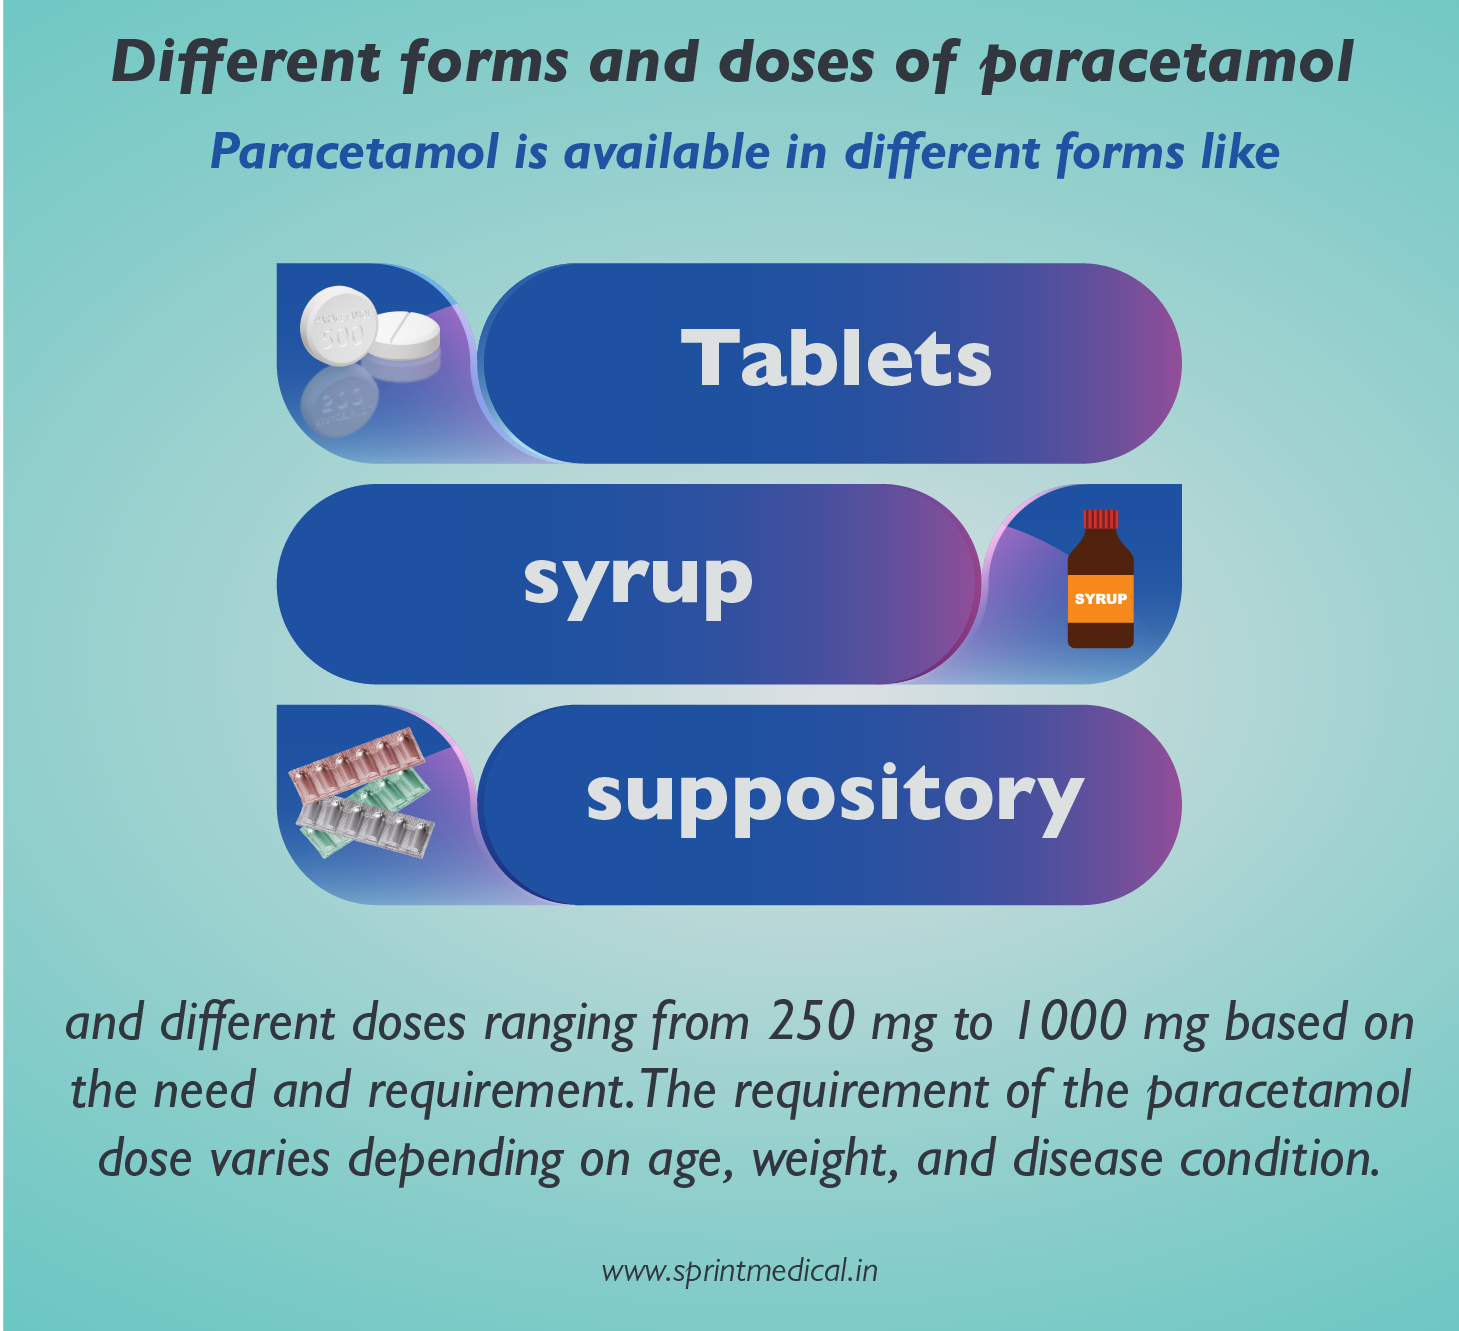 Paracetamol – uses, side effects and how to take it